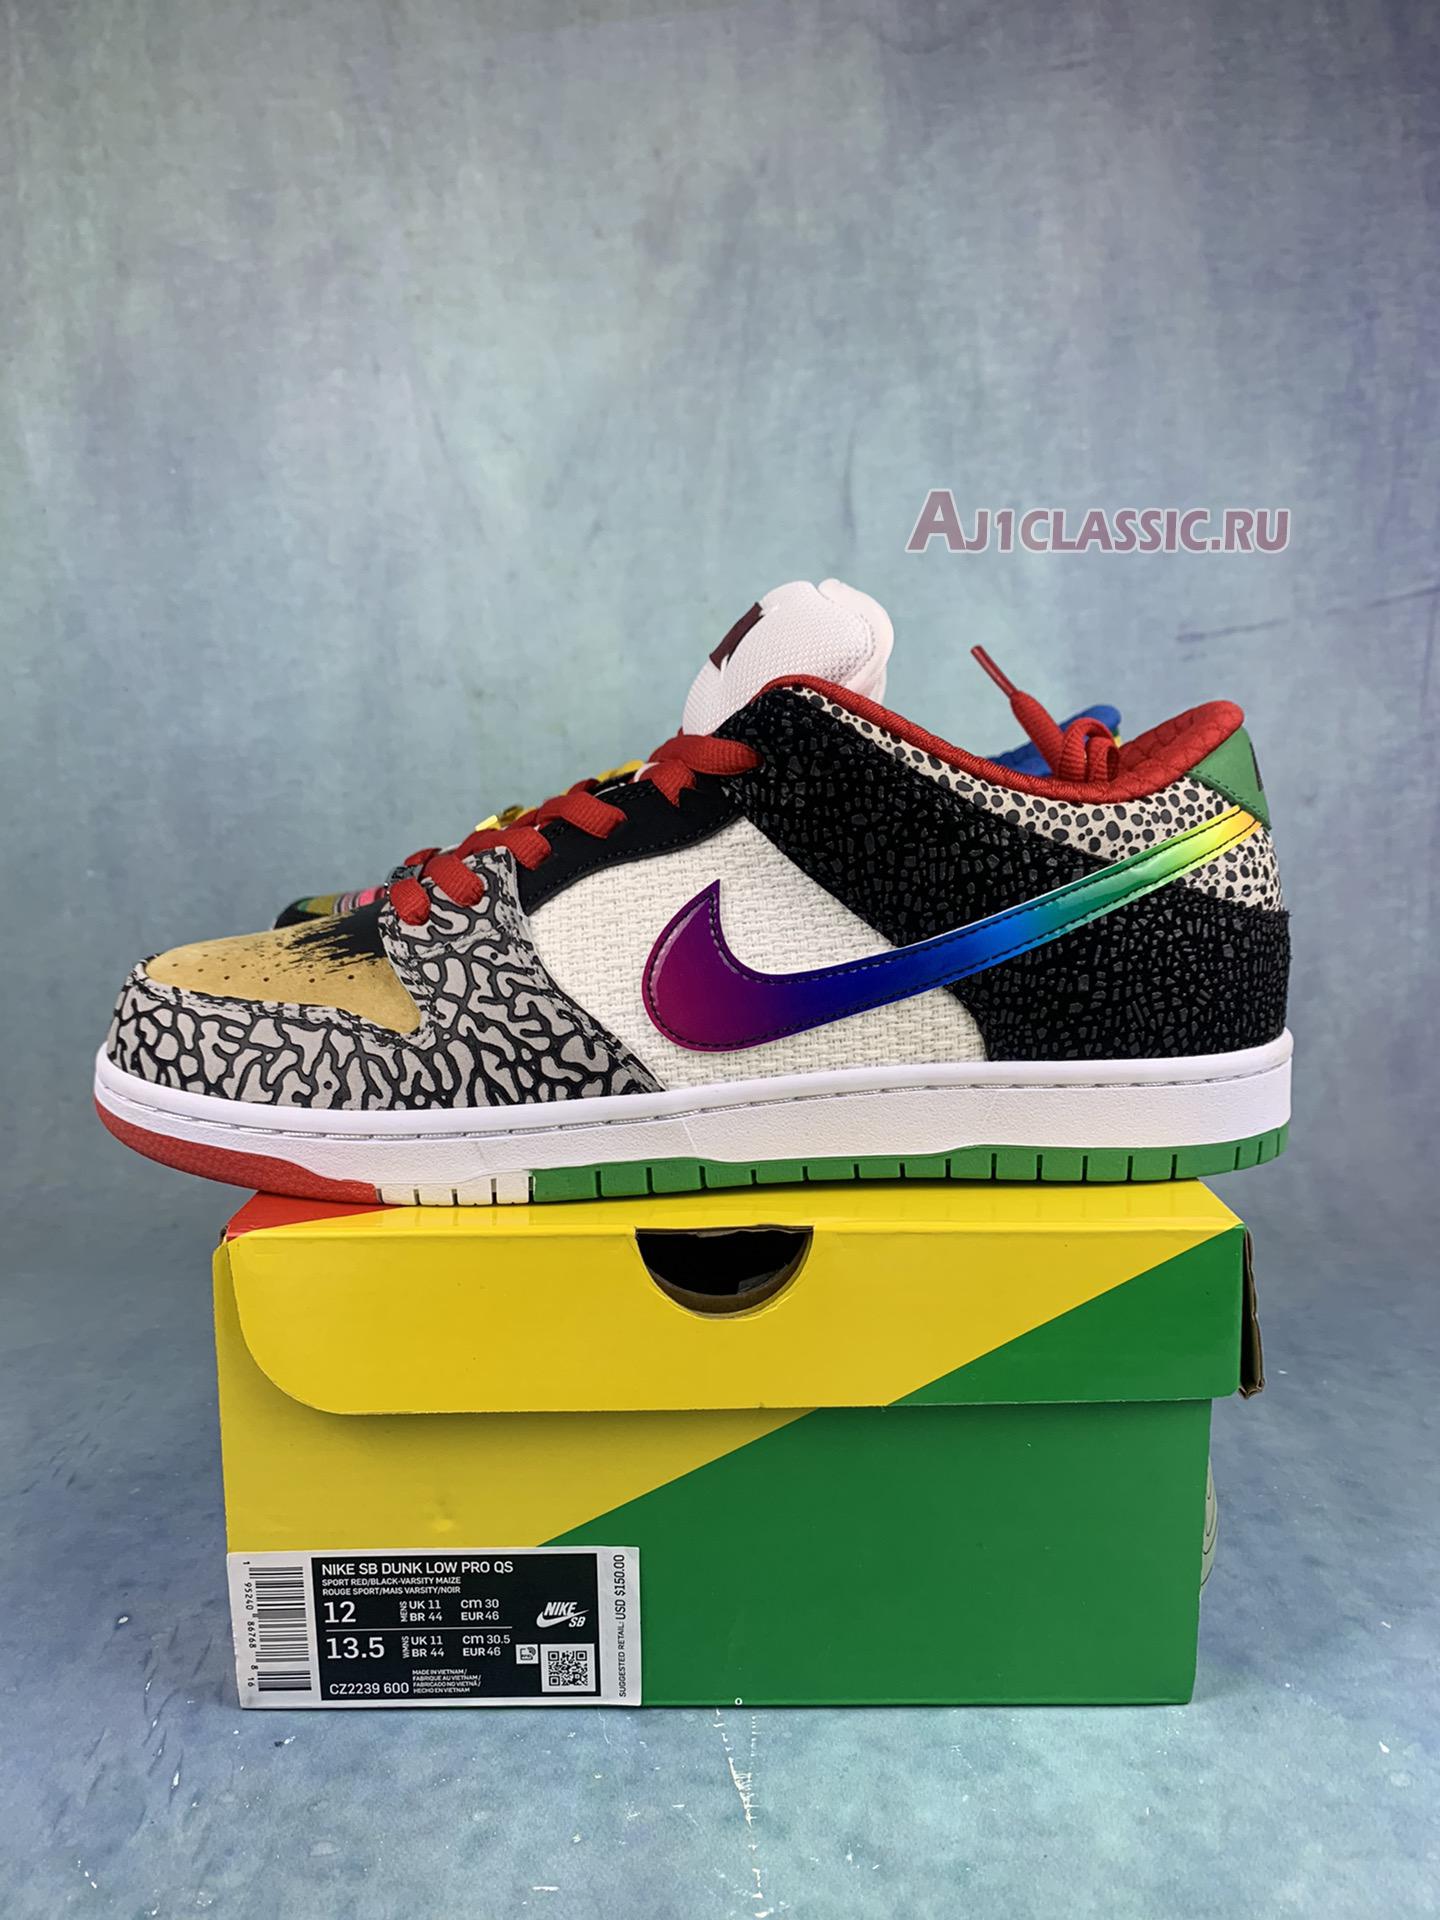 Nike SB Dunk Low "What The P-Rod" CZ2239-600-2